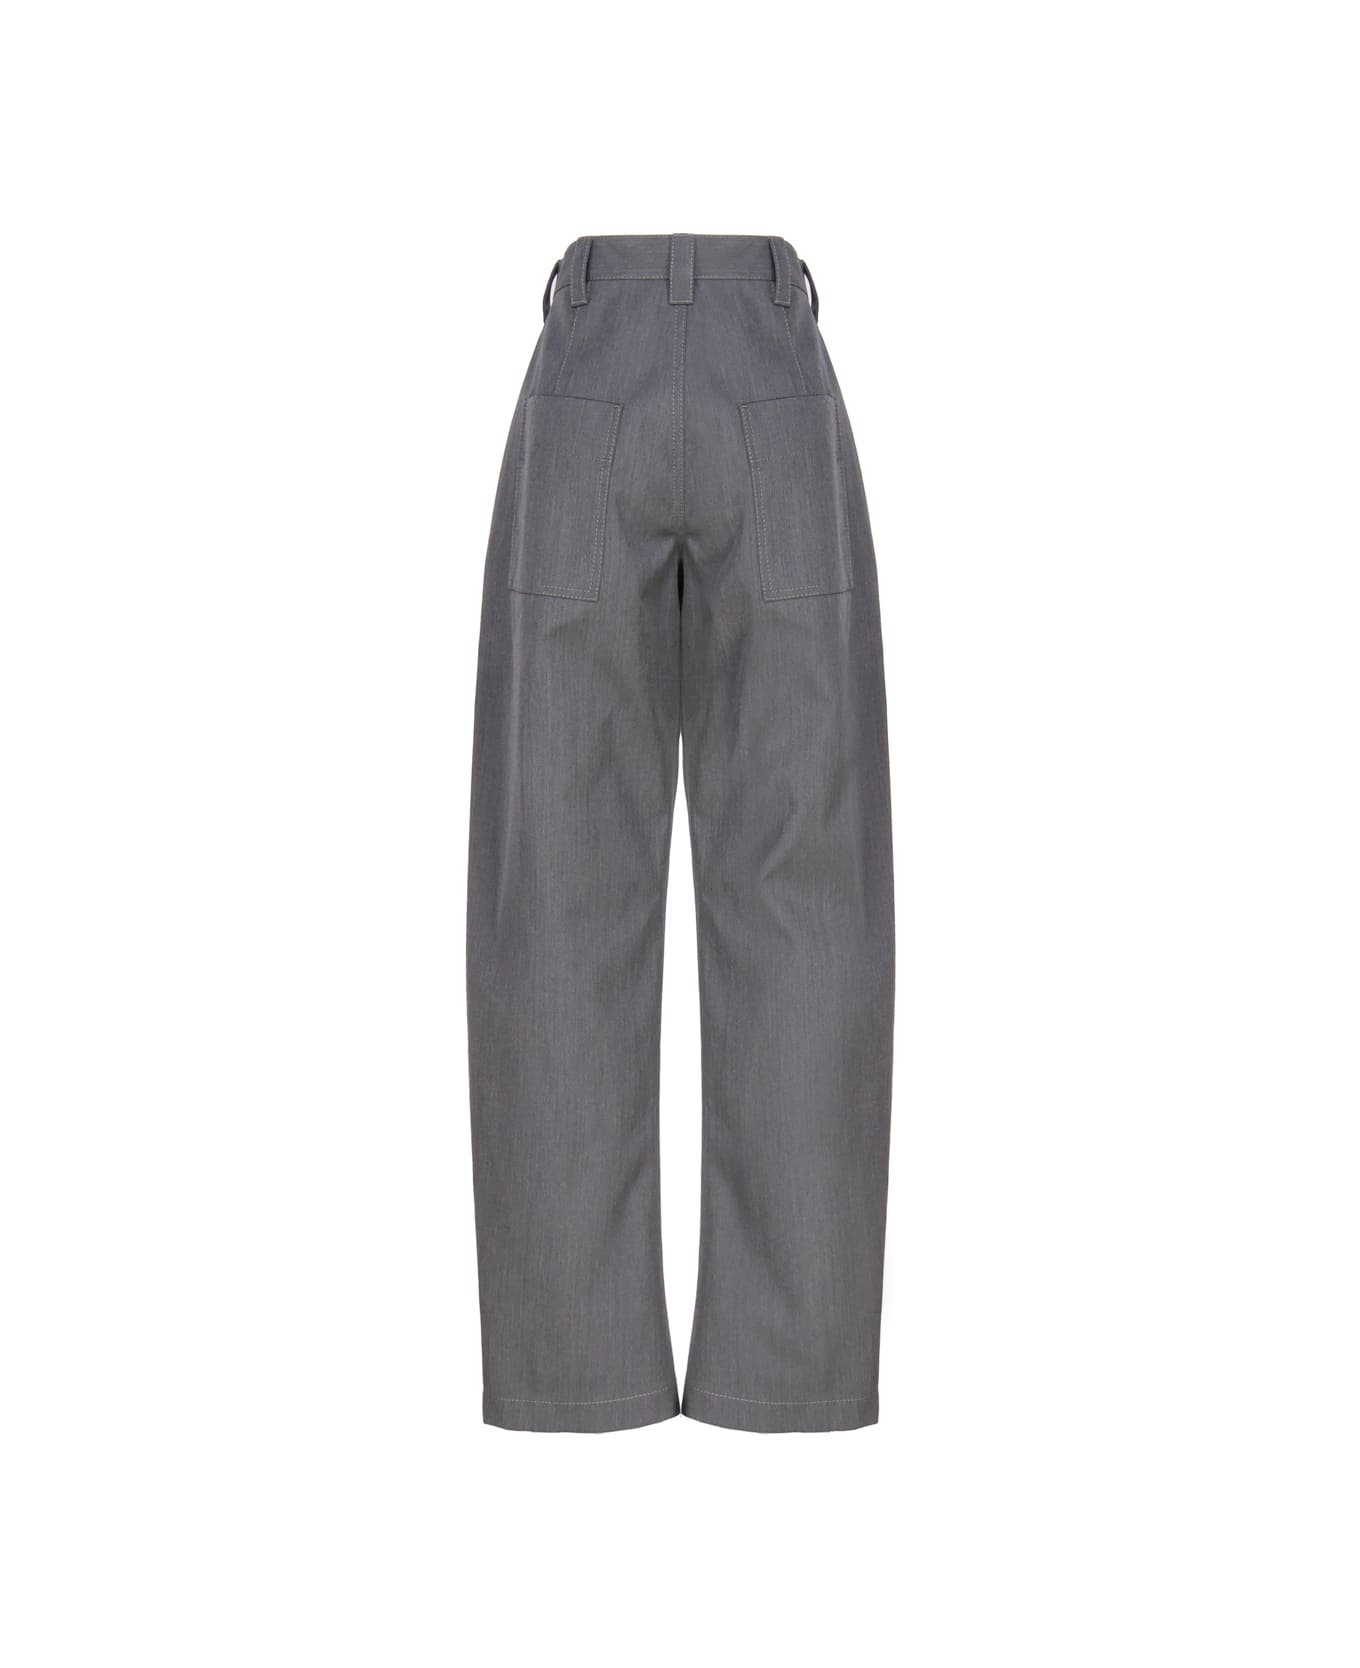 Bottega Veneta Tapered Trousers In Bonded Wool And Cotton - Charcoal/cane sugar ボトムス